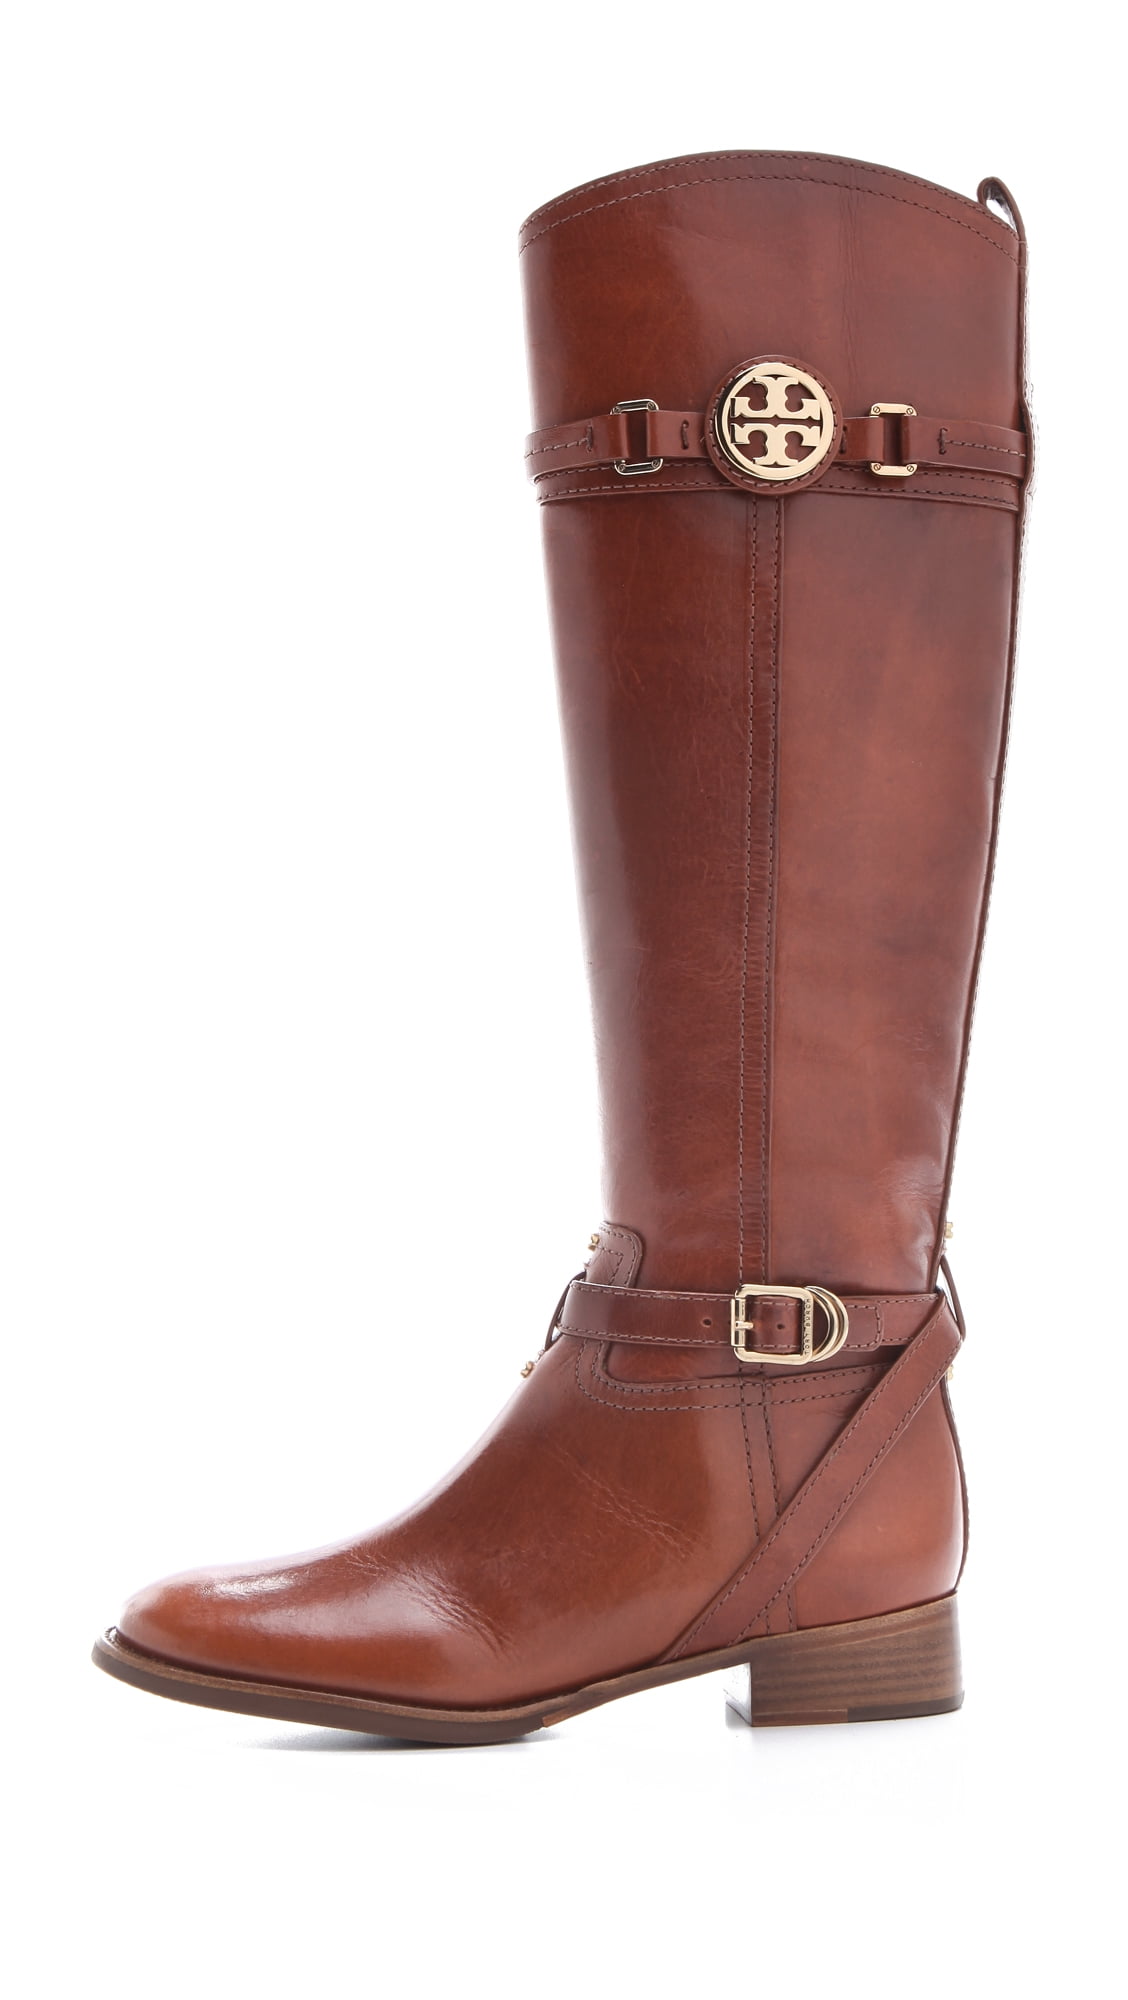 Calista Brown Leather riding boots sz  